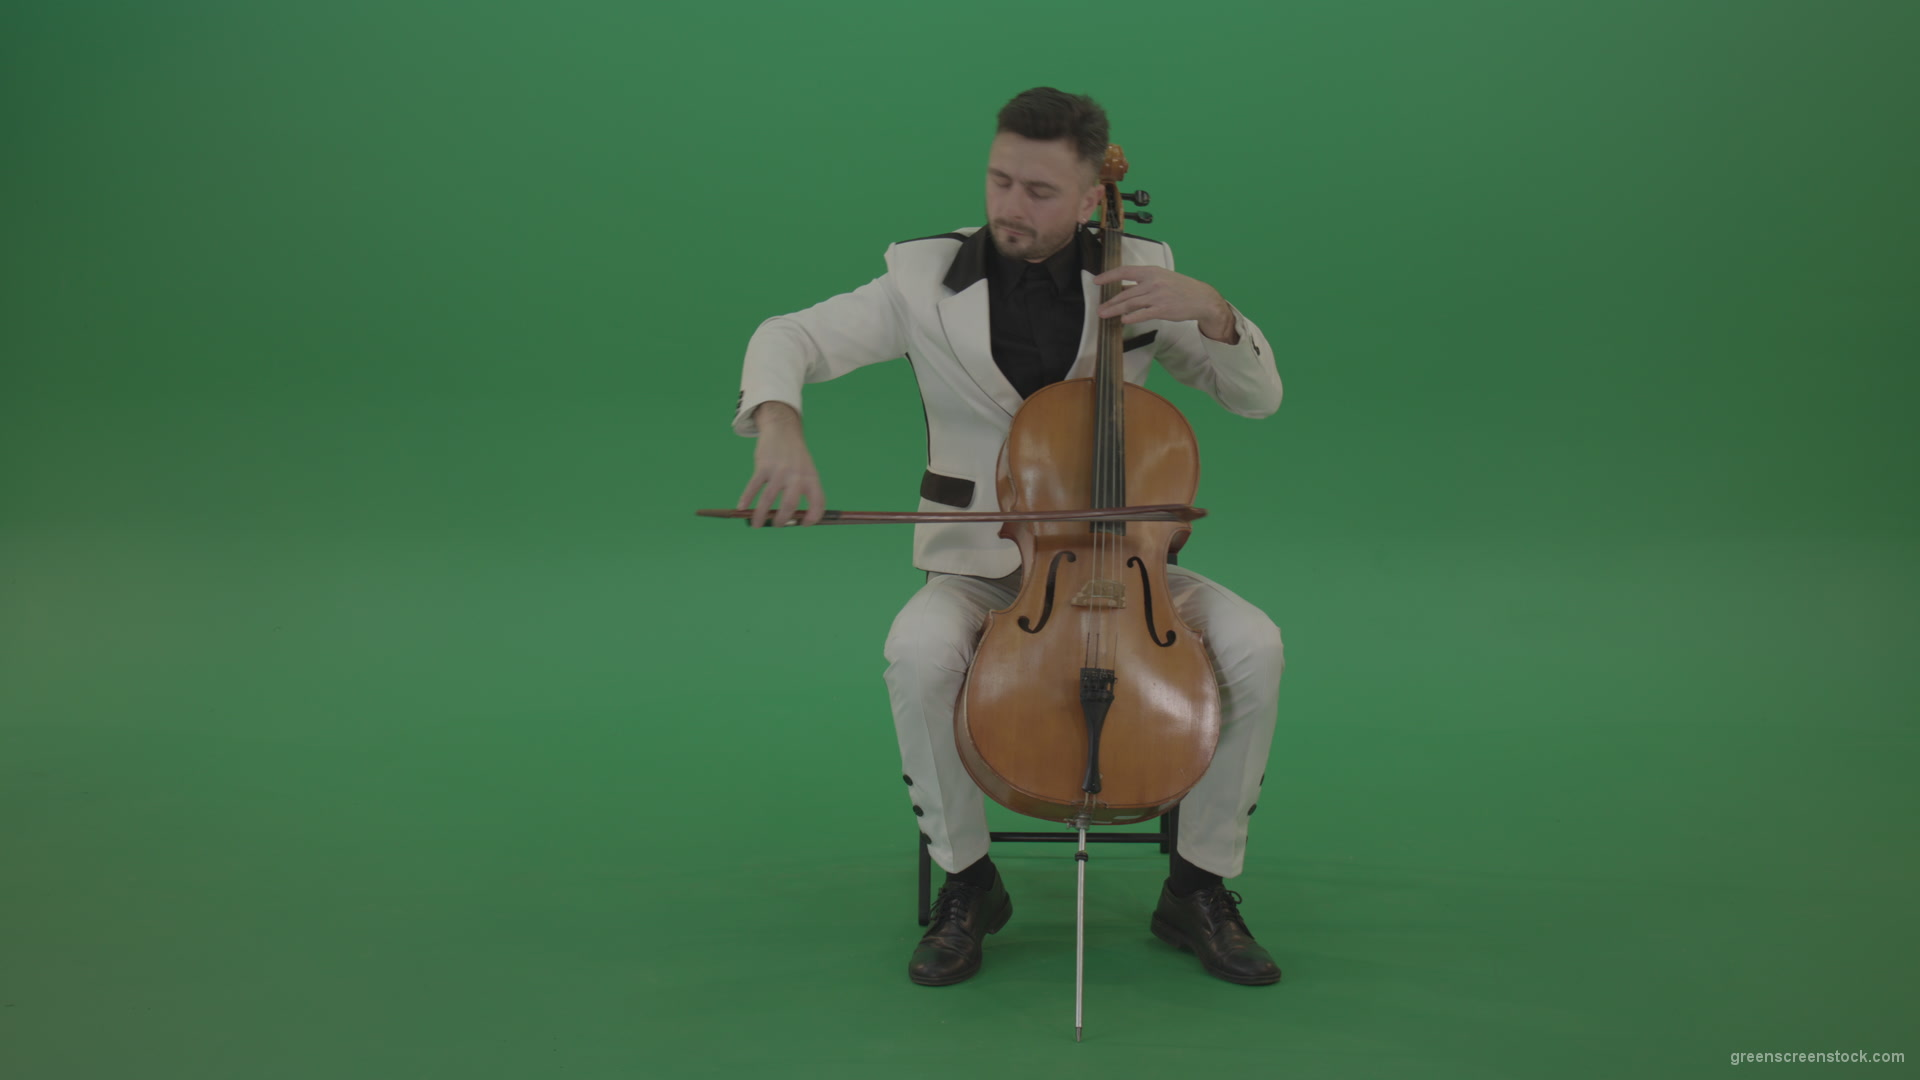 Classic-orchestra-man-in-white-wear-play-violoncello-cello-strings-music-instrument-isolated-on-green-screen_007 Green Screen Stock